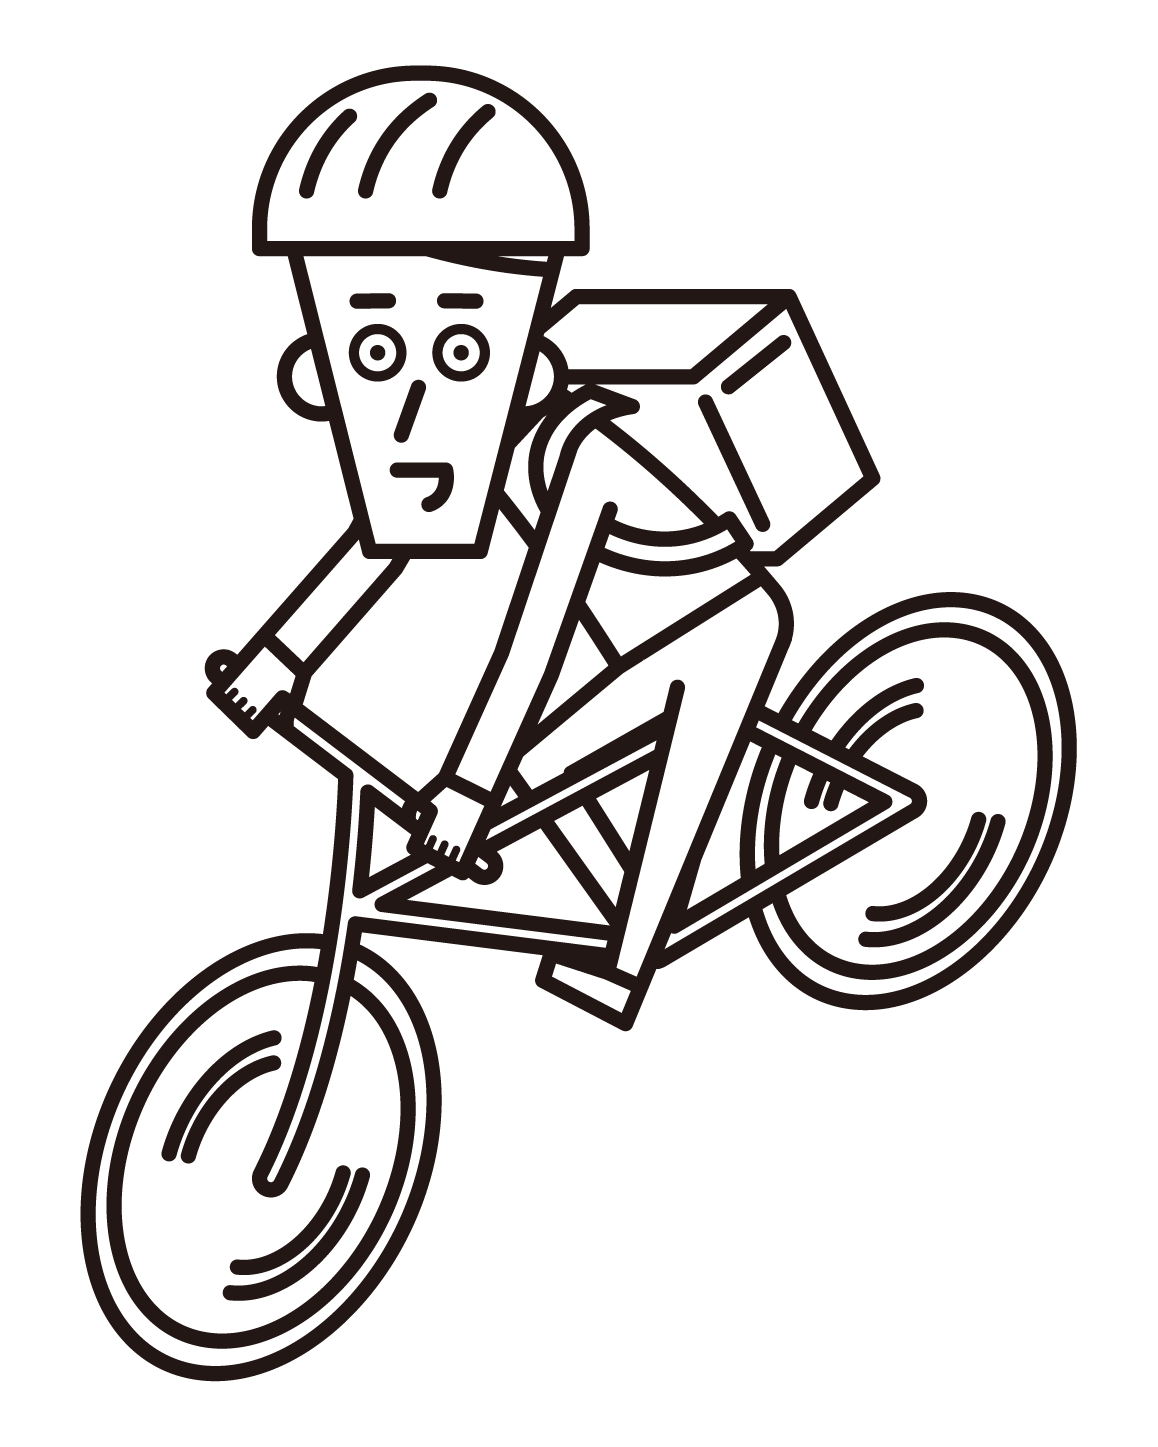 Illustration of a man delivering food on a bicycle